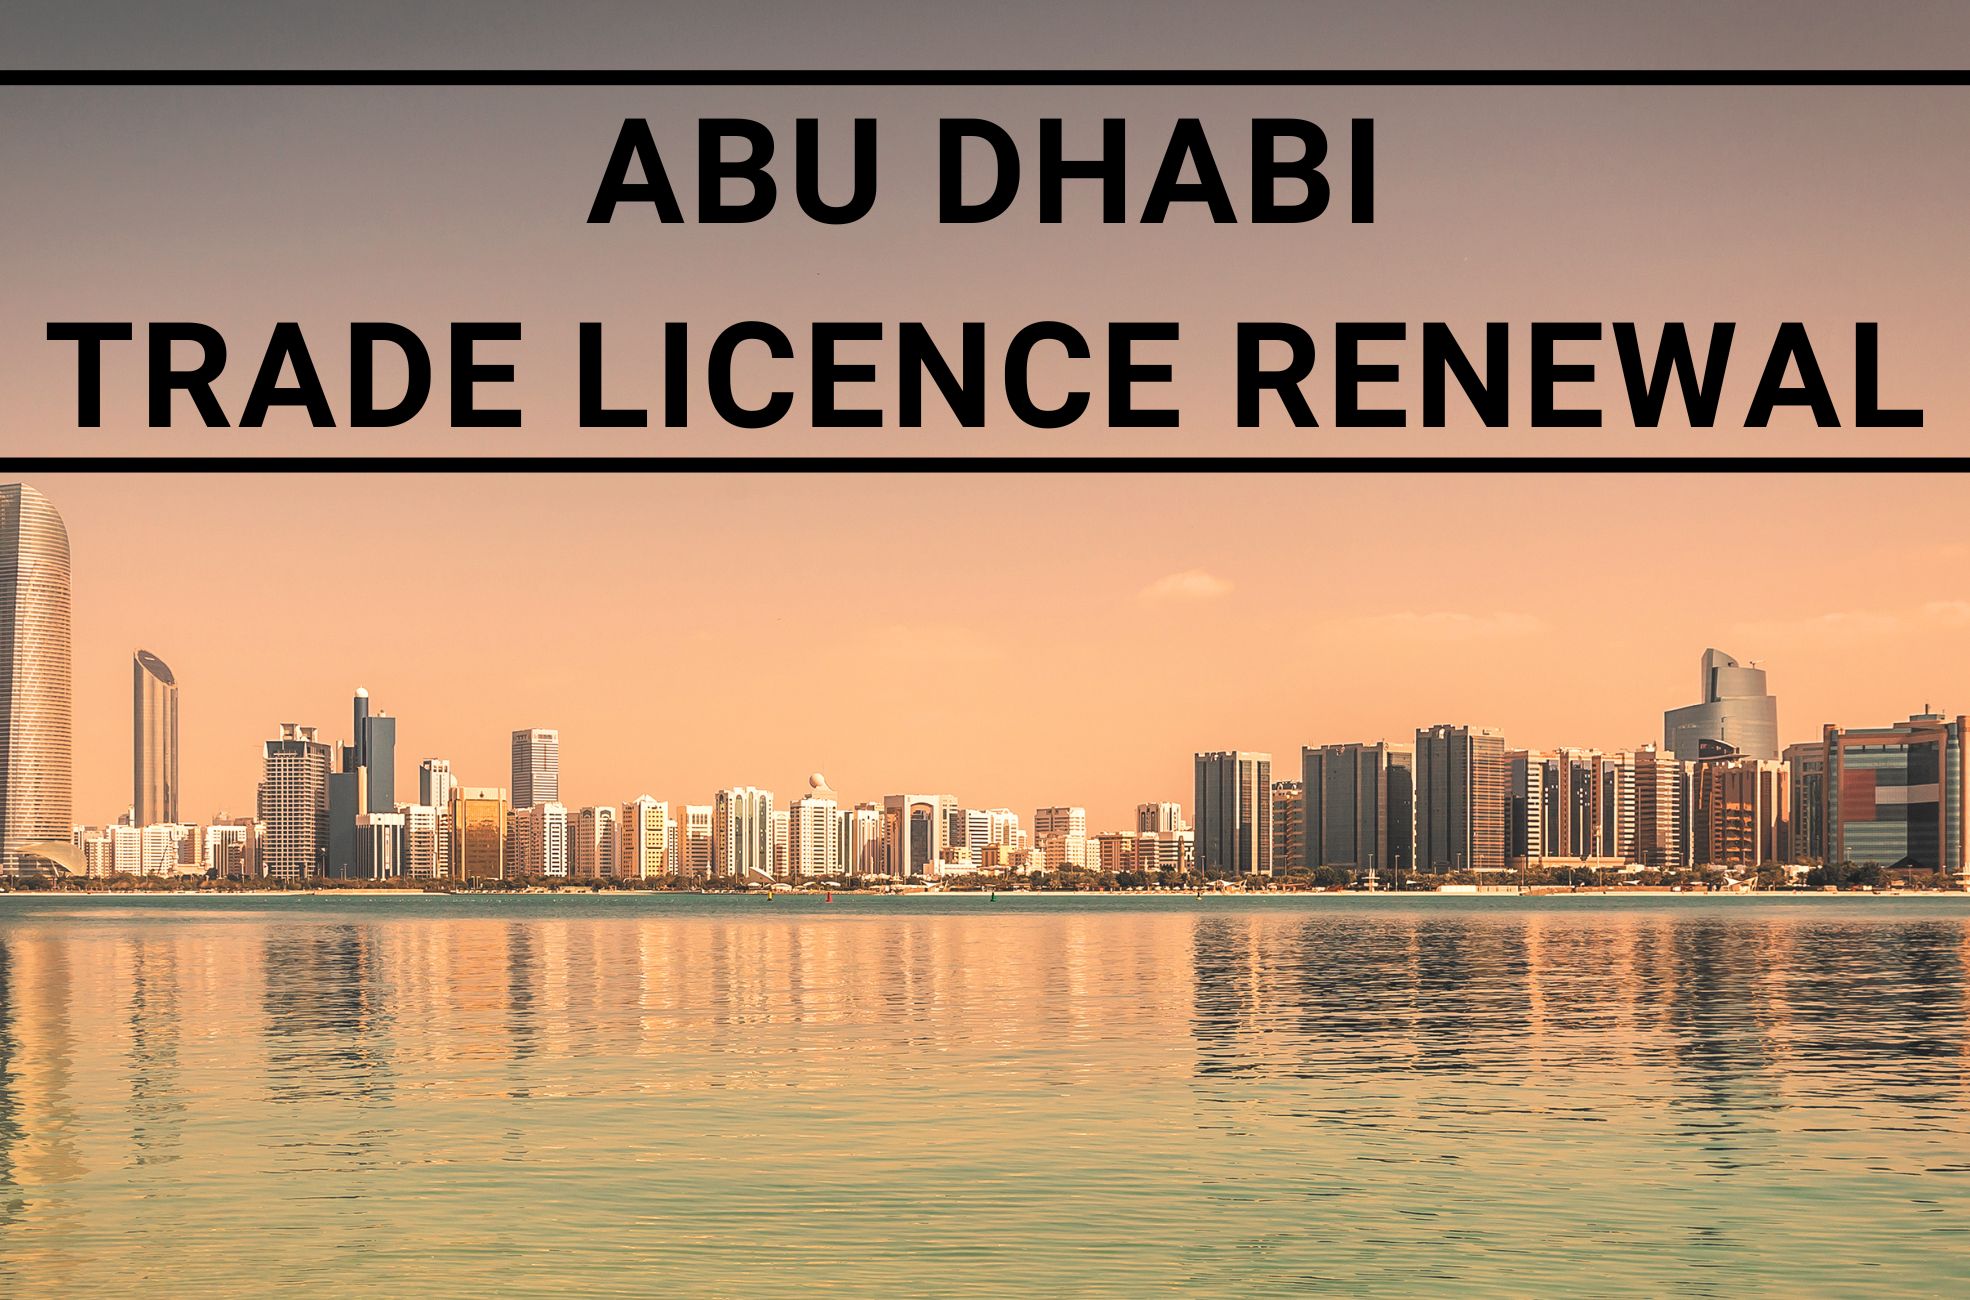 UAE Cityscape With Title "Abu Dhabi Trade Licence Renewal"